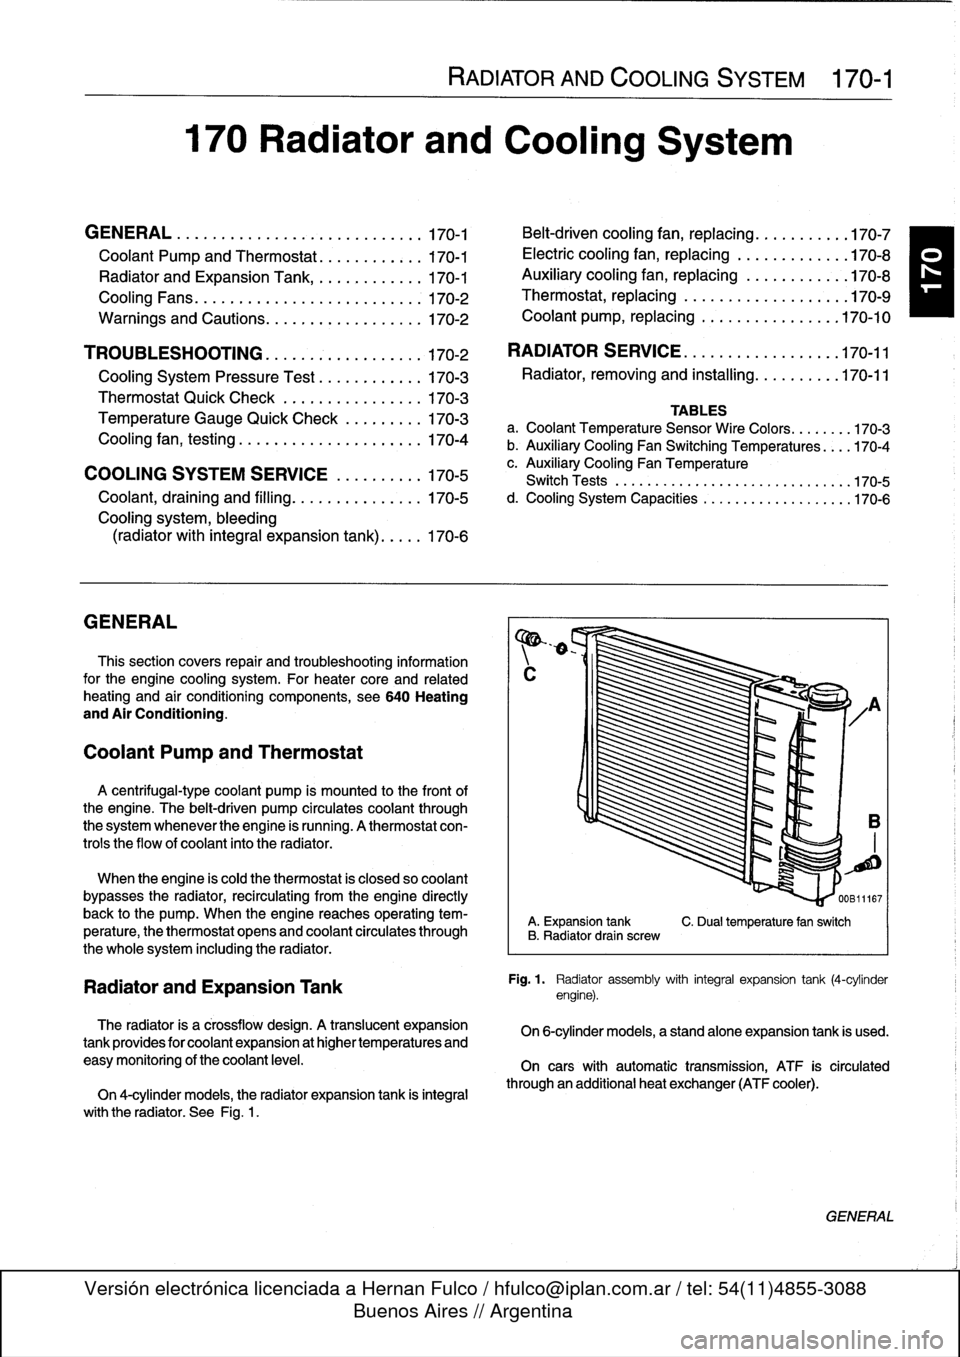 BMW 318i 1998 E36 Workshop Manual 170
Radiator
and
Cooling
System

GENERAL
.
.
.....
.
...
.
.
.
.
.
....
.
.
.
.
.
.
.
.170-1

Coolant
Pump
and
Thermostat
........
.
.
.
.
170-1

Radiator
and
Expansion
Tank
.........
.
...
170-1

Coo